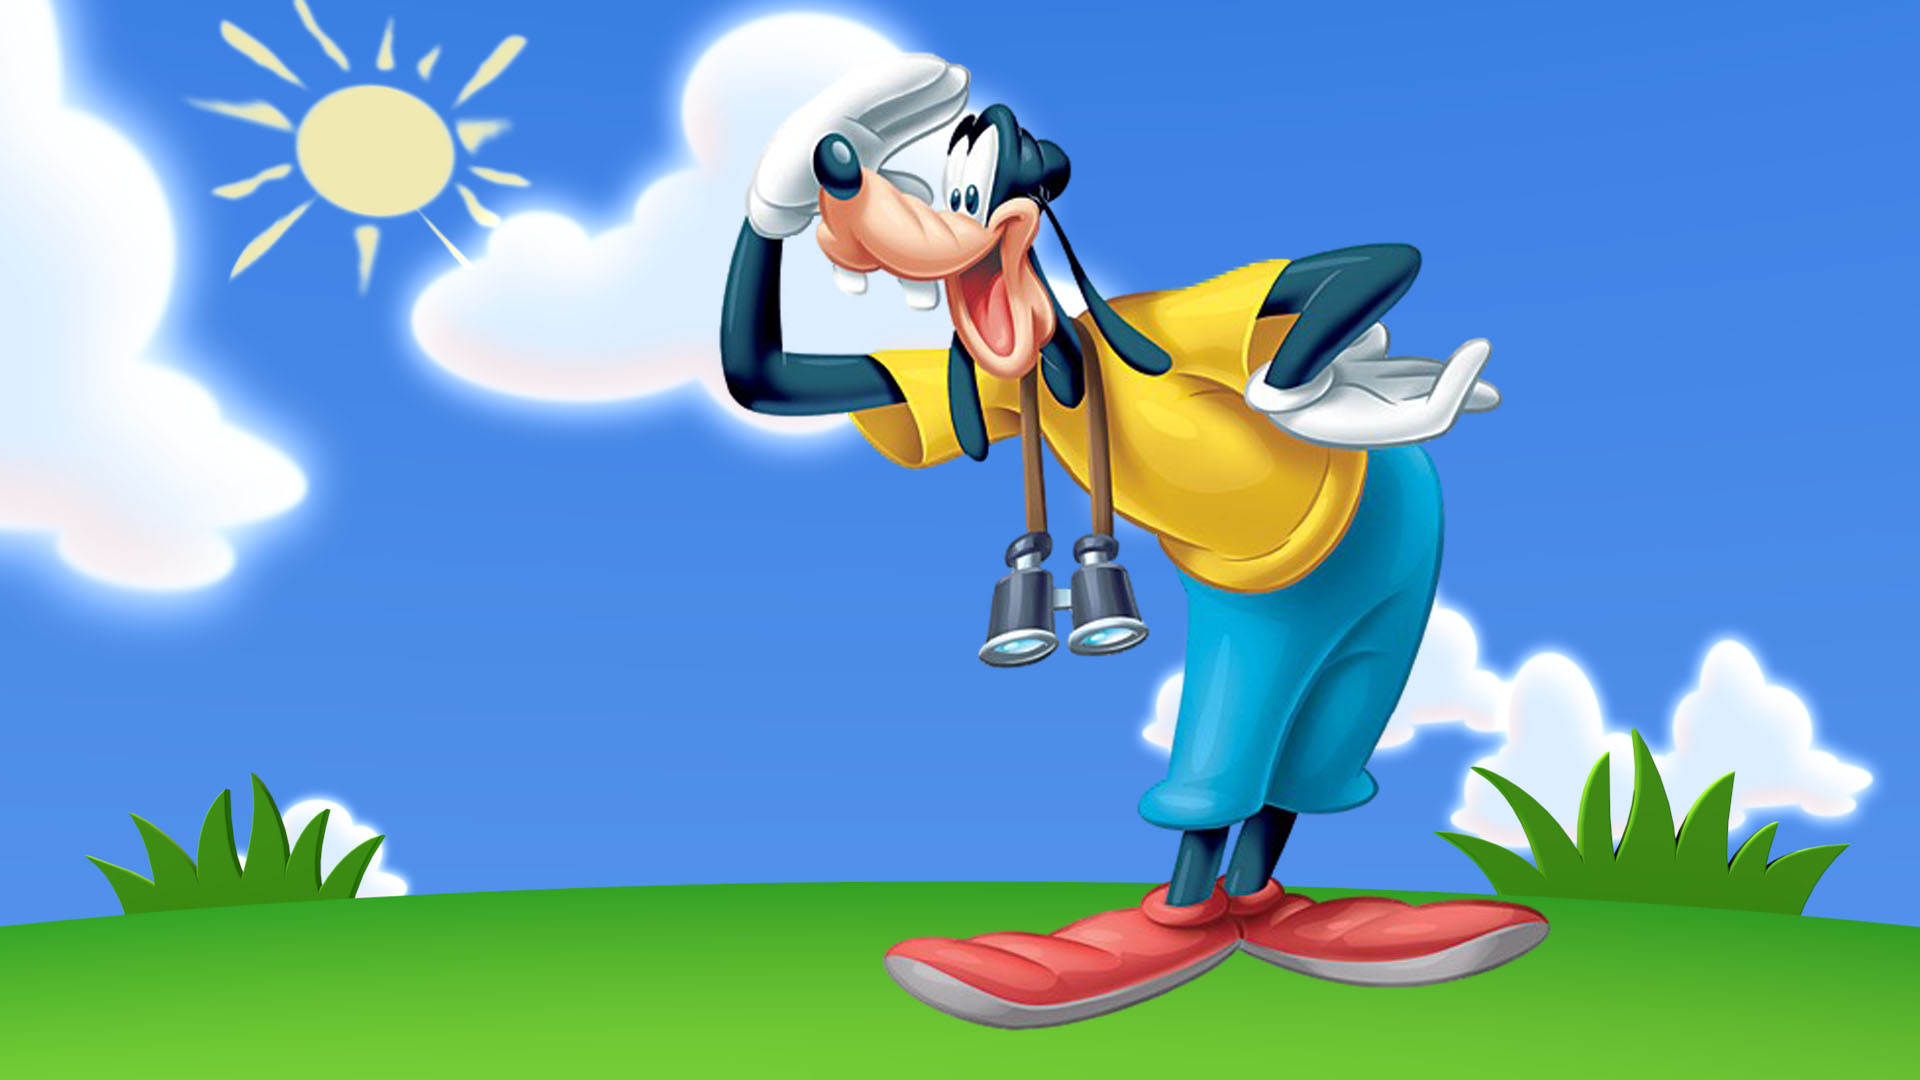 Goofy Disney Characters From Cartoons Poster Wallpaper Hd 3840x2160 Images